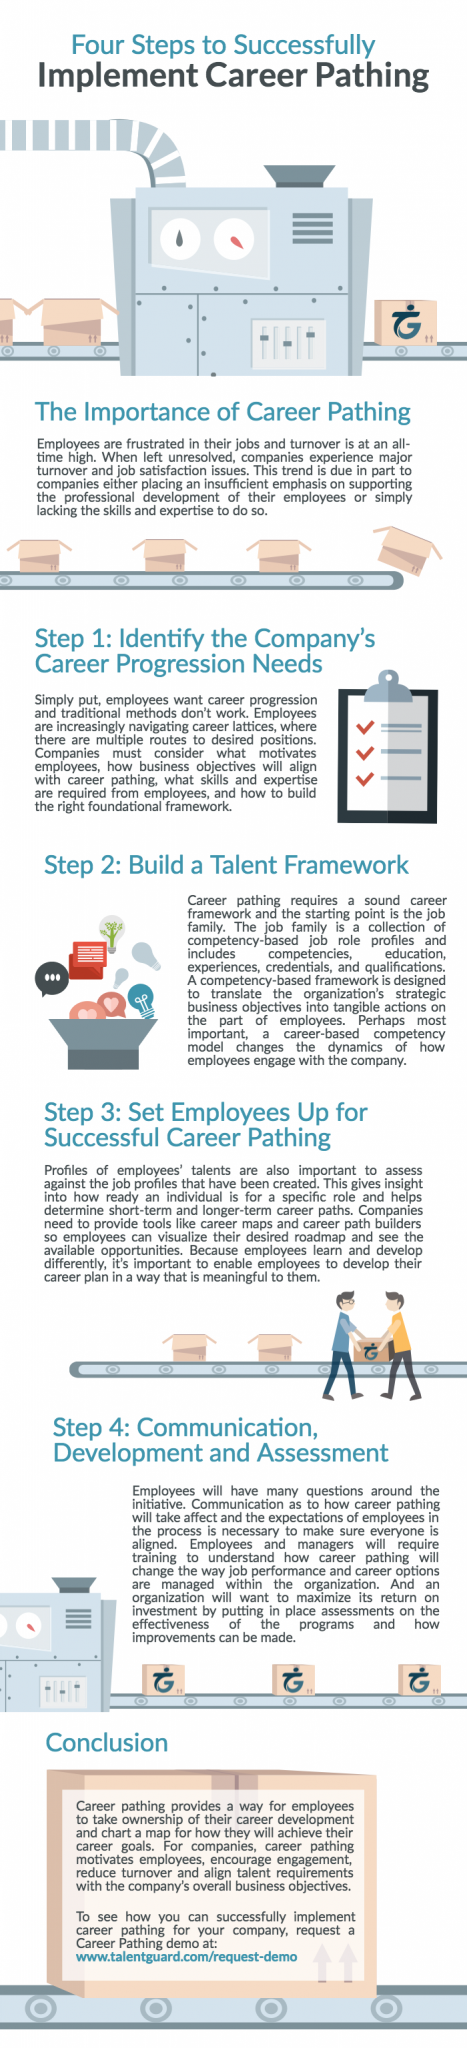 Four Steps to Successfully Implement Career Pathing